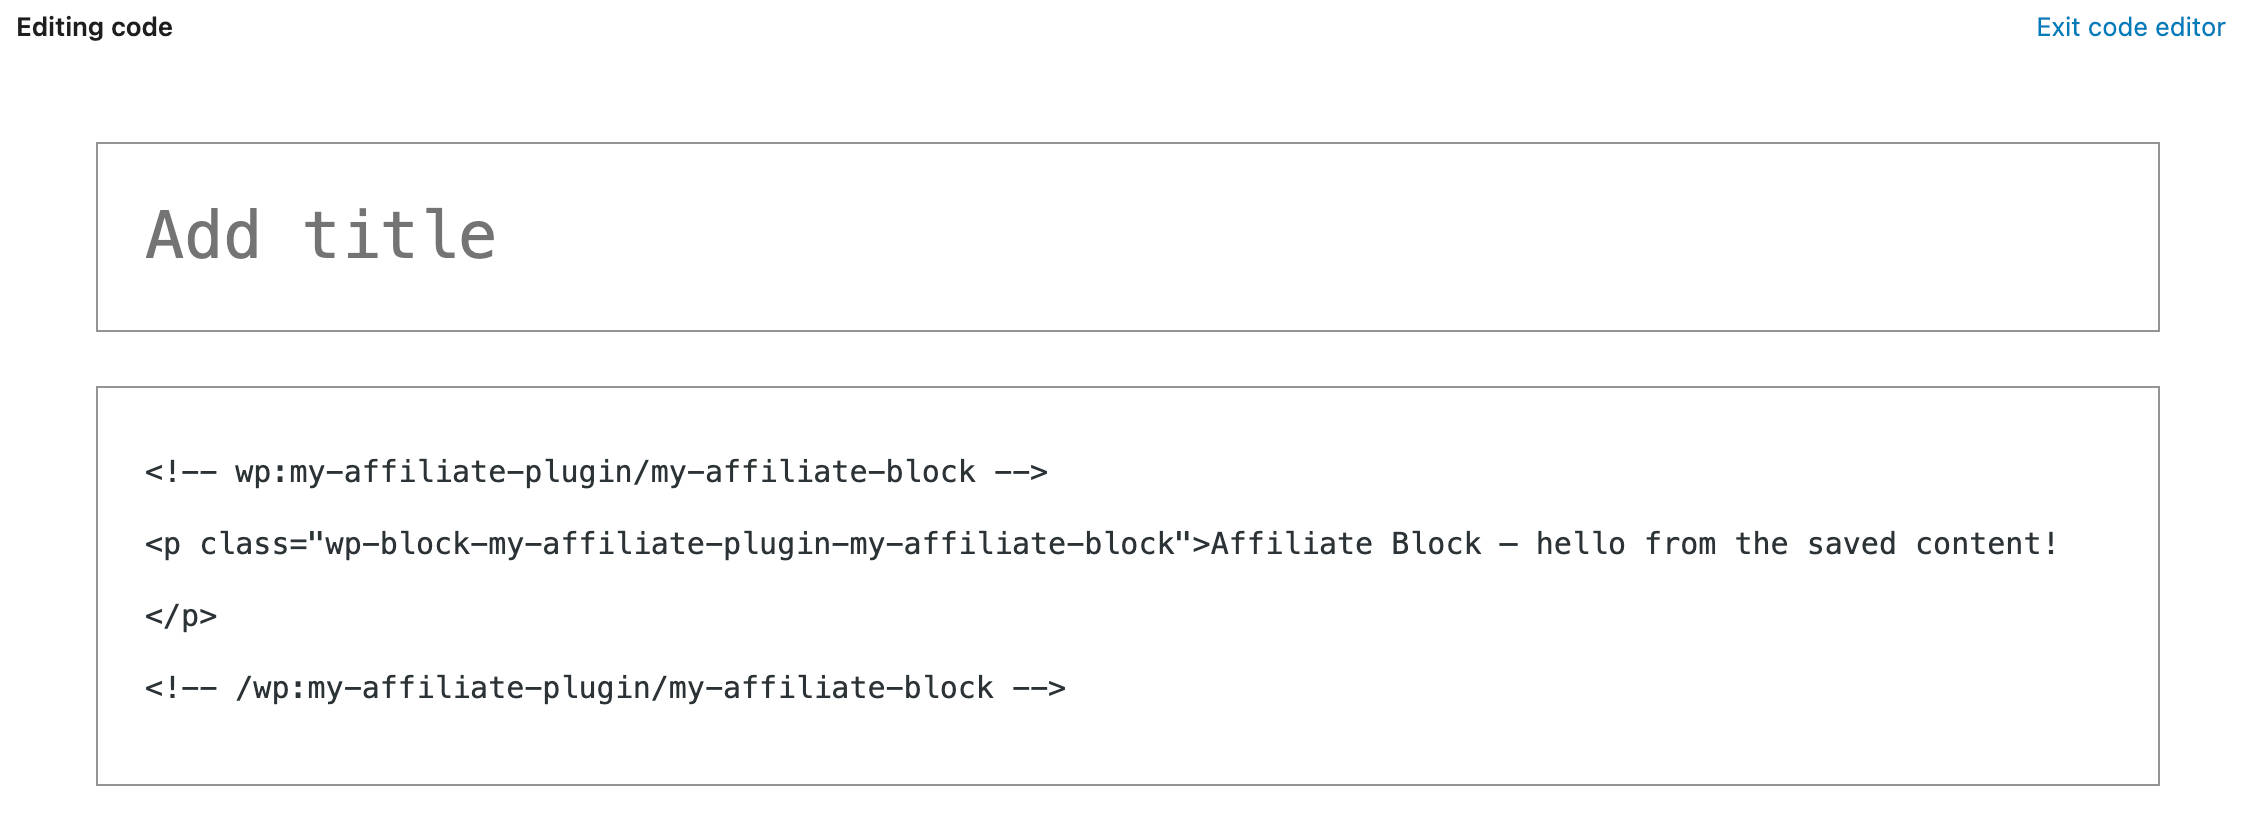 The starter block in the code editor." width="2246" height="828"  />

<p class=